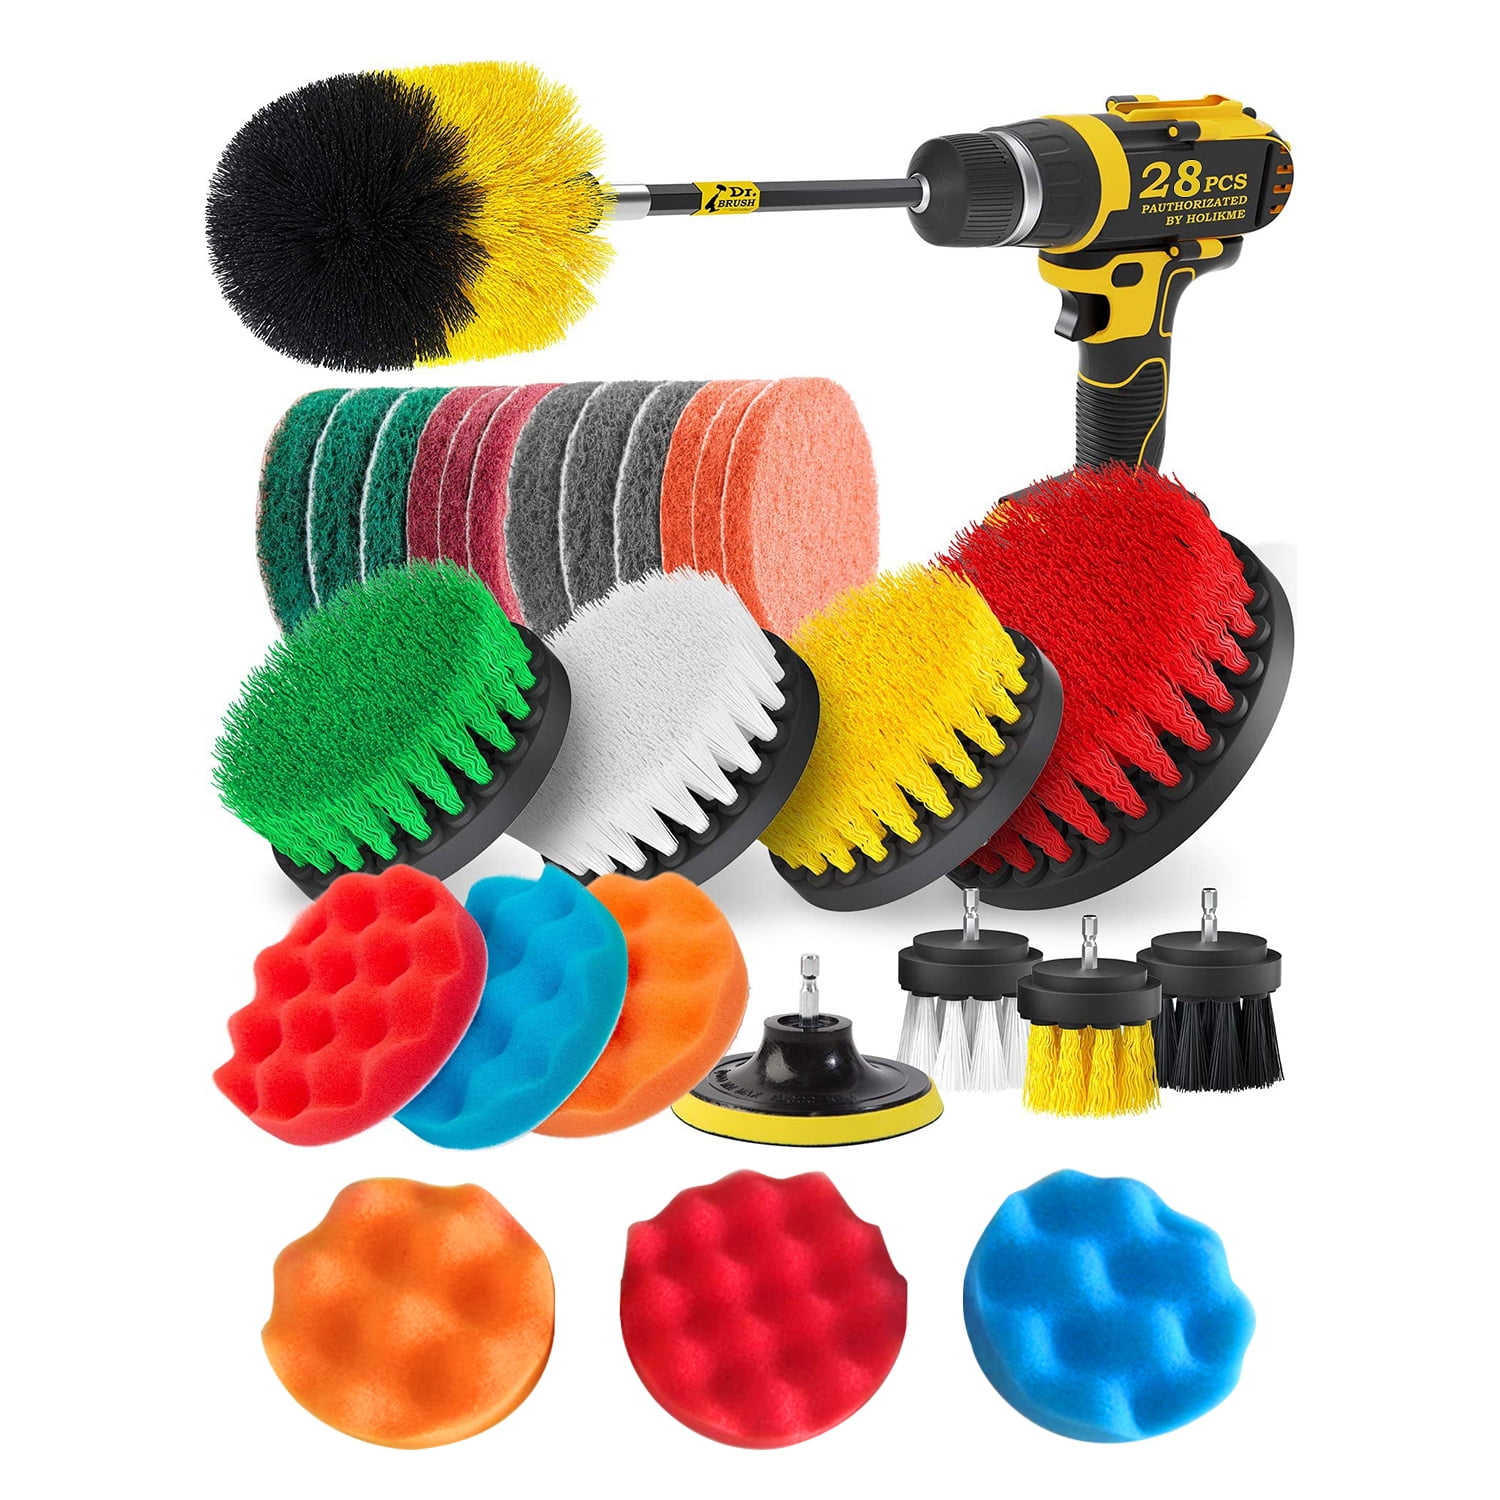 YIHATA 7 Pack Drill Brush Attachments Set Multi-Purpose Power Scrubber Cleaning 